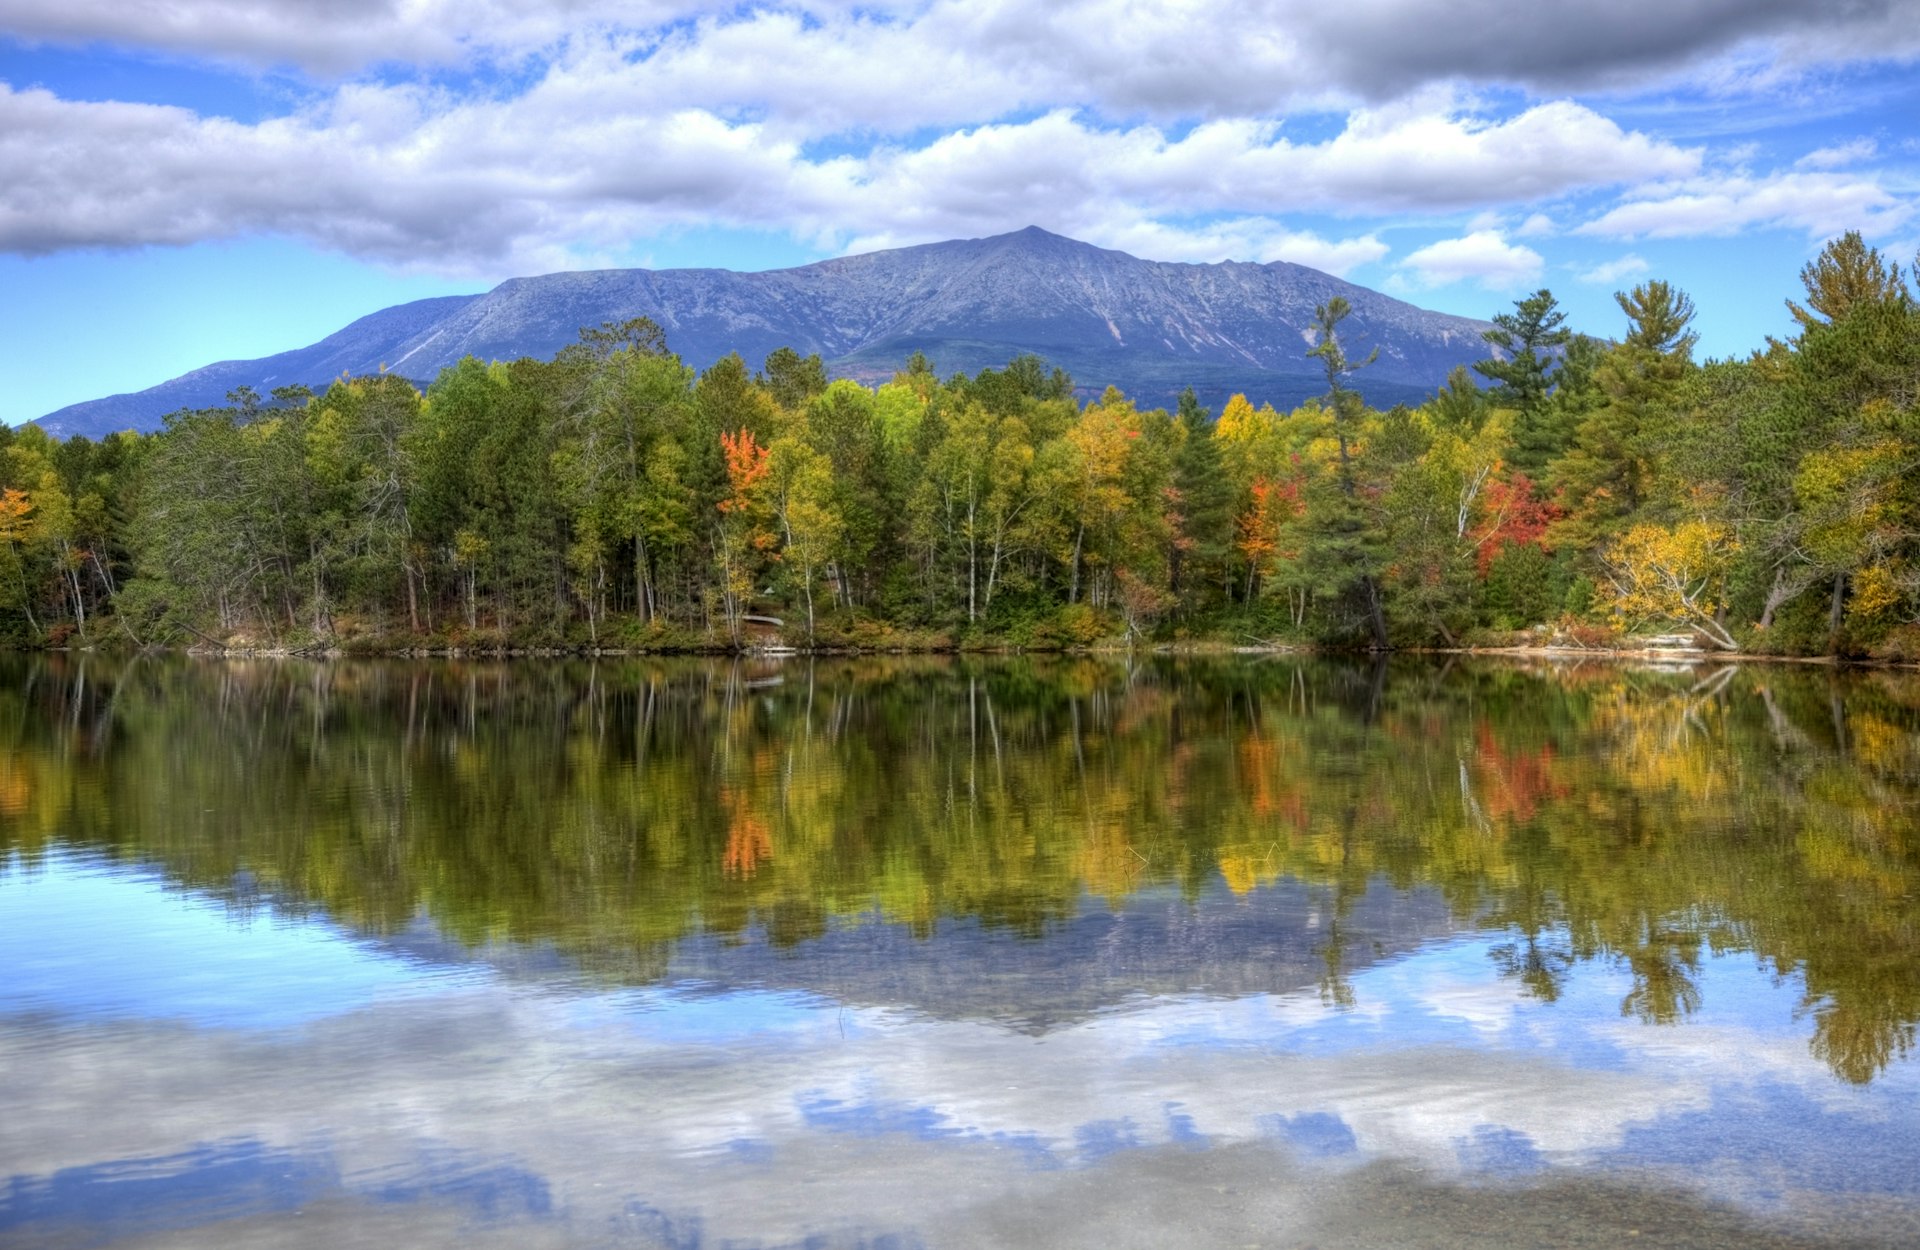 Mt Katahdin reflected in a lake surrounded by trees in Maine